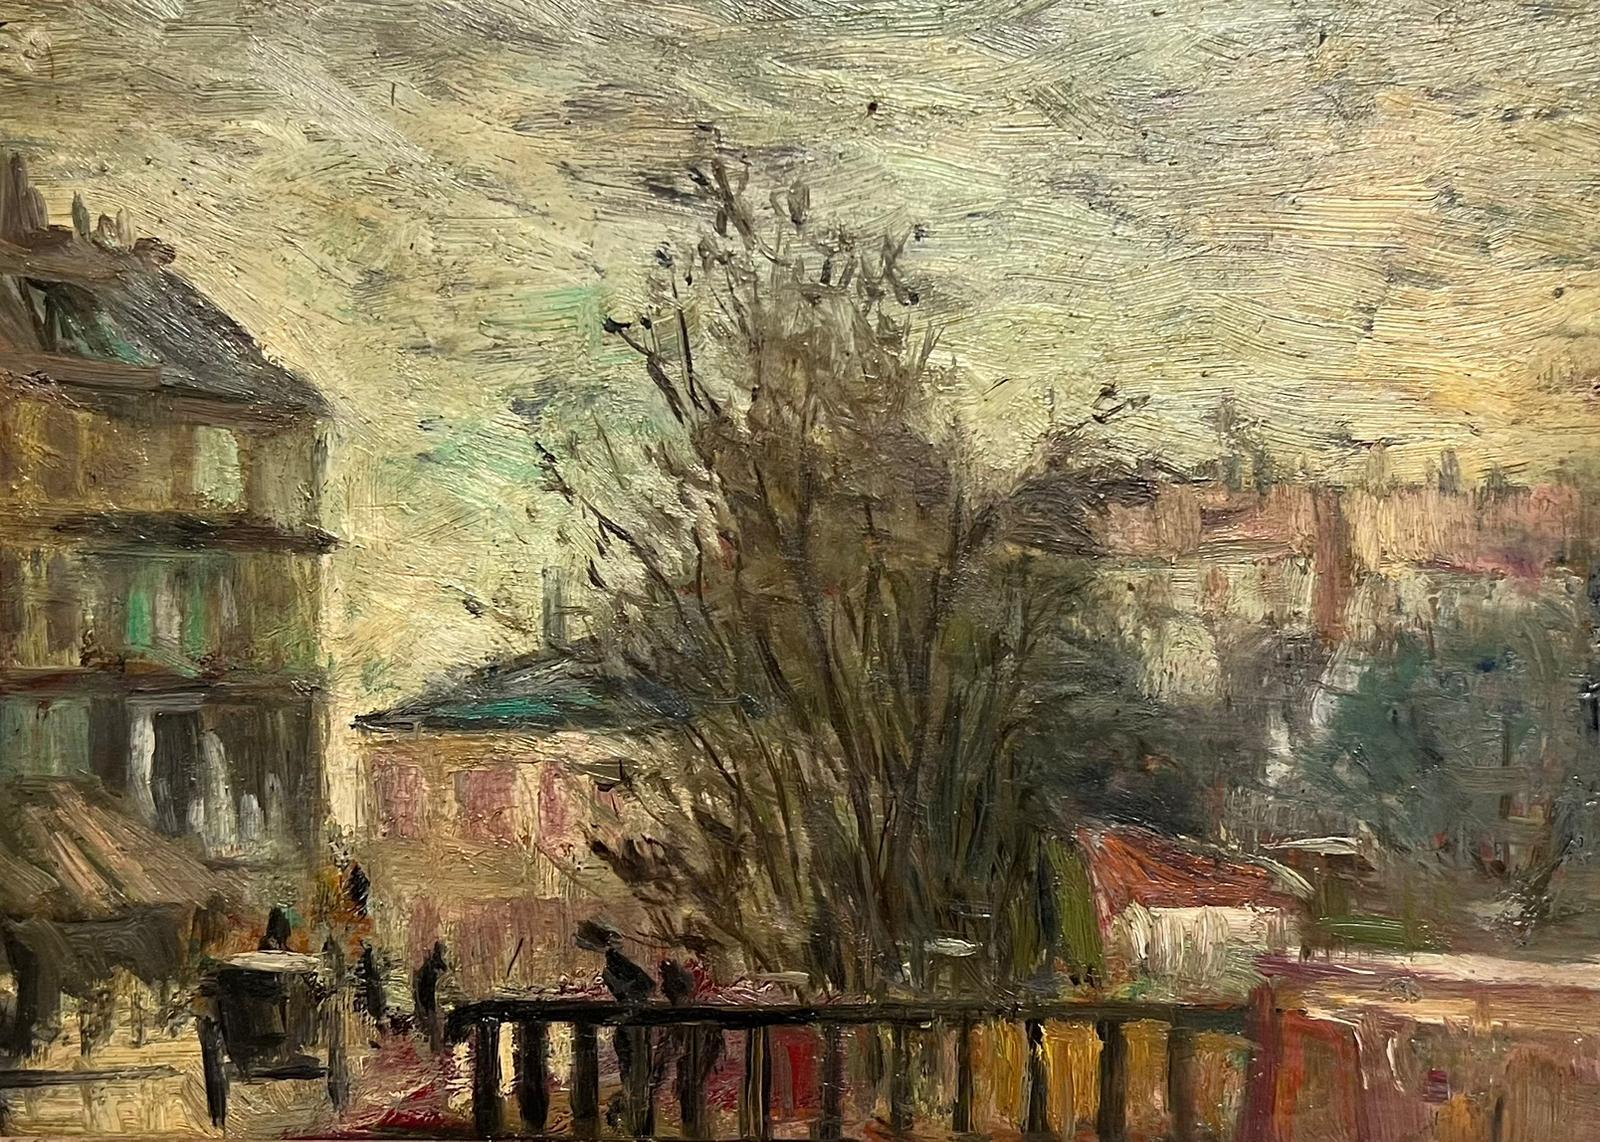 The Parisian Boulevard
French Impressionist artist, circa 1890's
circle of Camille Pissarro (1830-1903)
oil on wooden board, framed
framed: 10.5 x 13.5 inches
board: 7.25 x 9.75 inches
provenance: private collection, France
condition: very good and